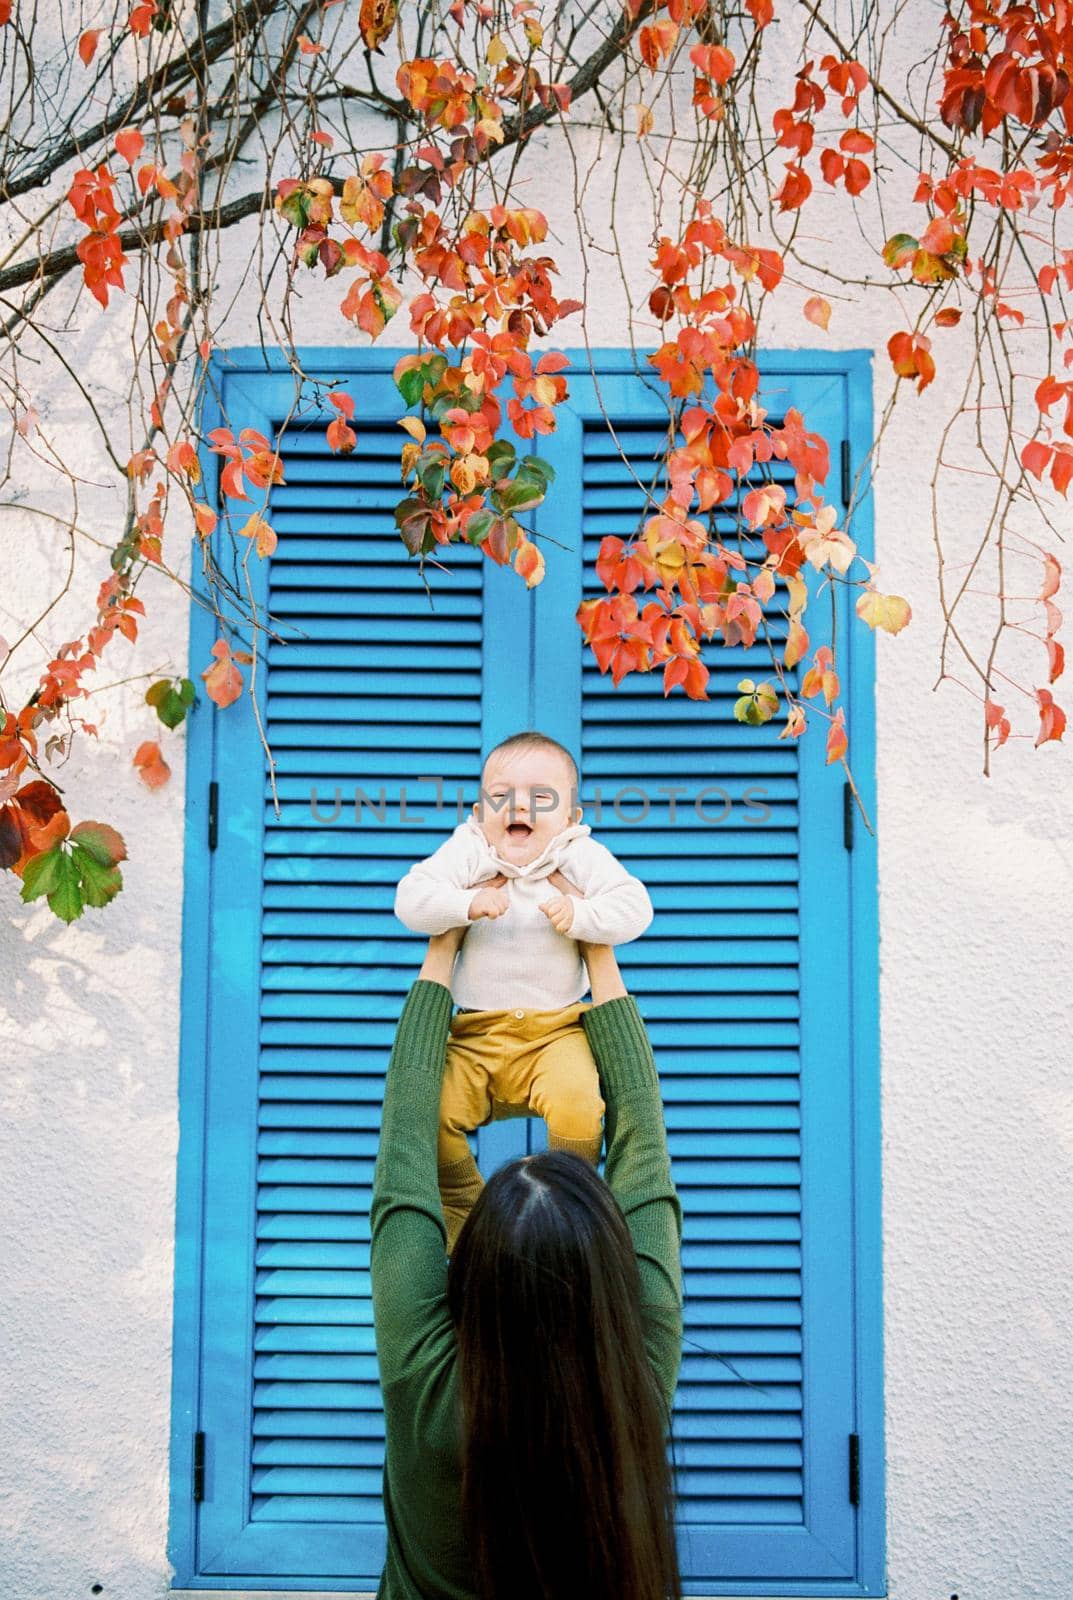 Mom holds a laughing baby high above her head near the blinds on the window by Nadtochiy